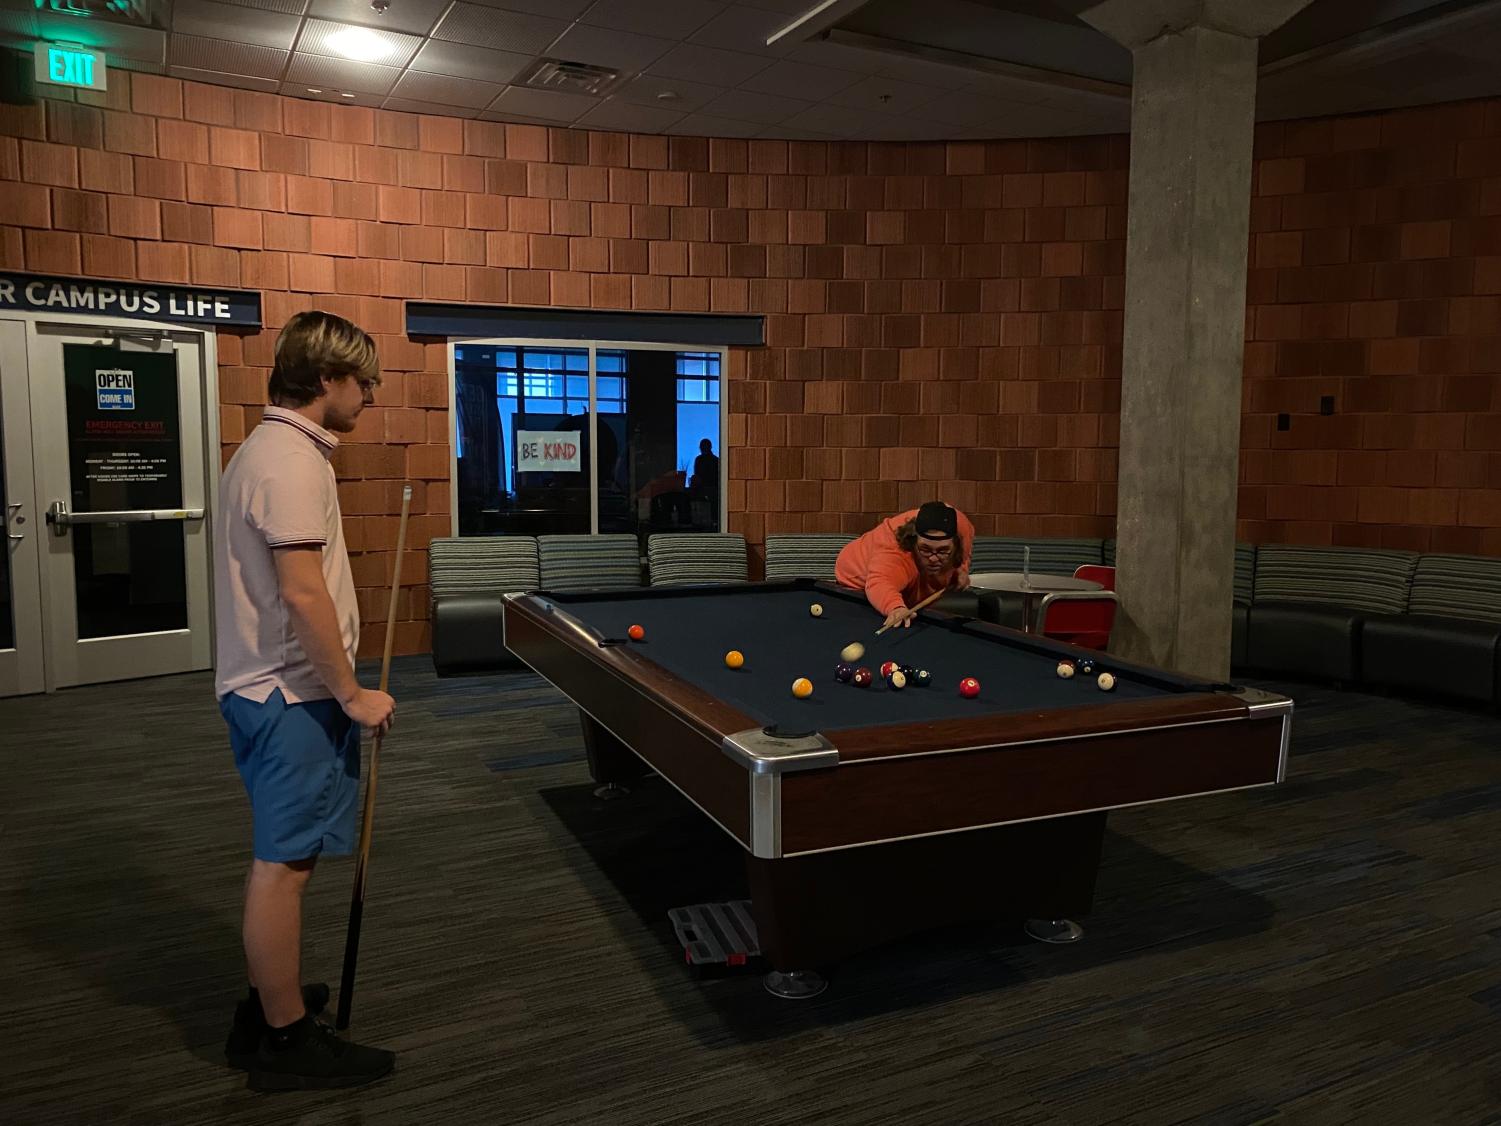 (Left to right) John McLain, freshman kinesiology major, and Pierce Howard, senior political science major, play pool in the basement of University Center East during the afternoon power outage Thursday. (Photo by Shelby Clark)